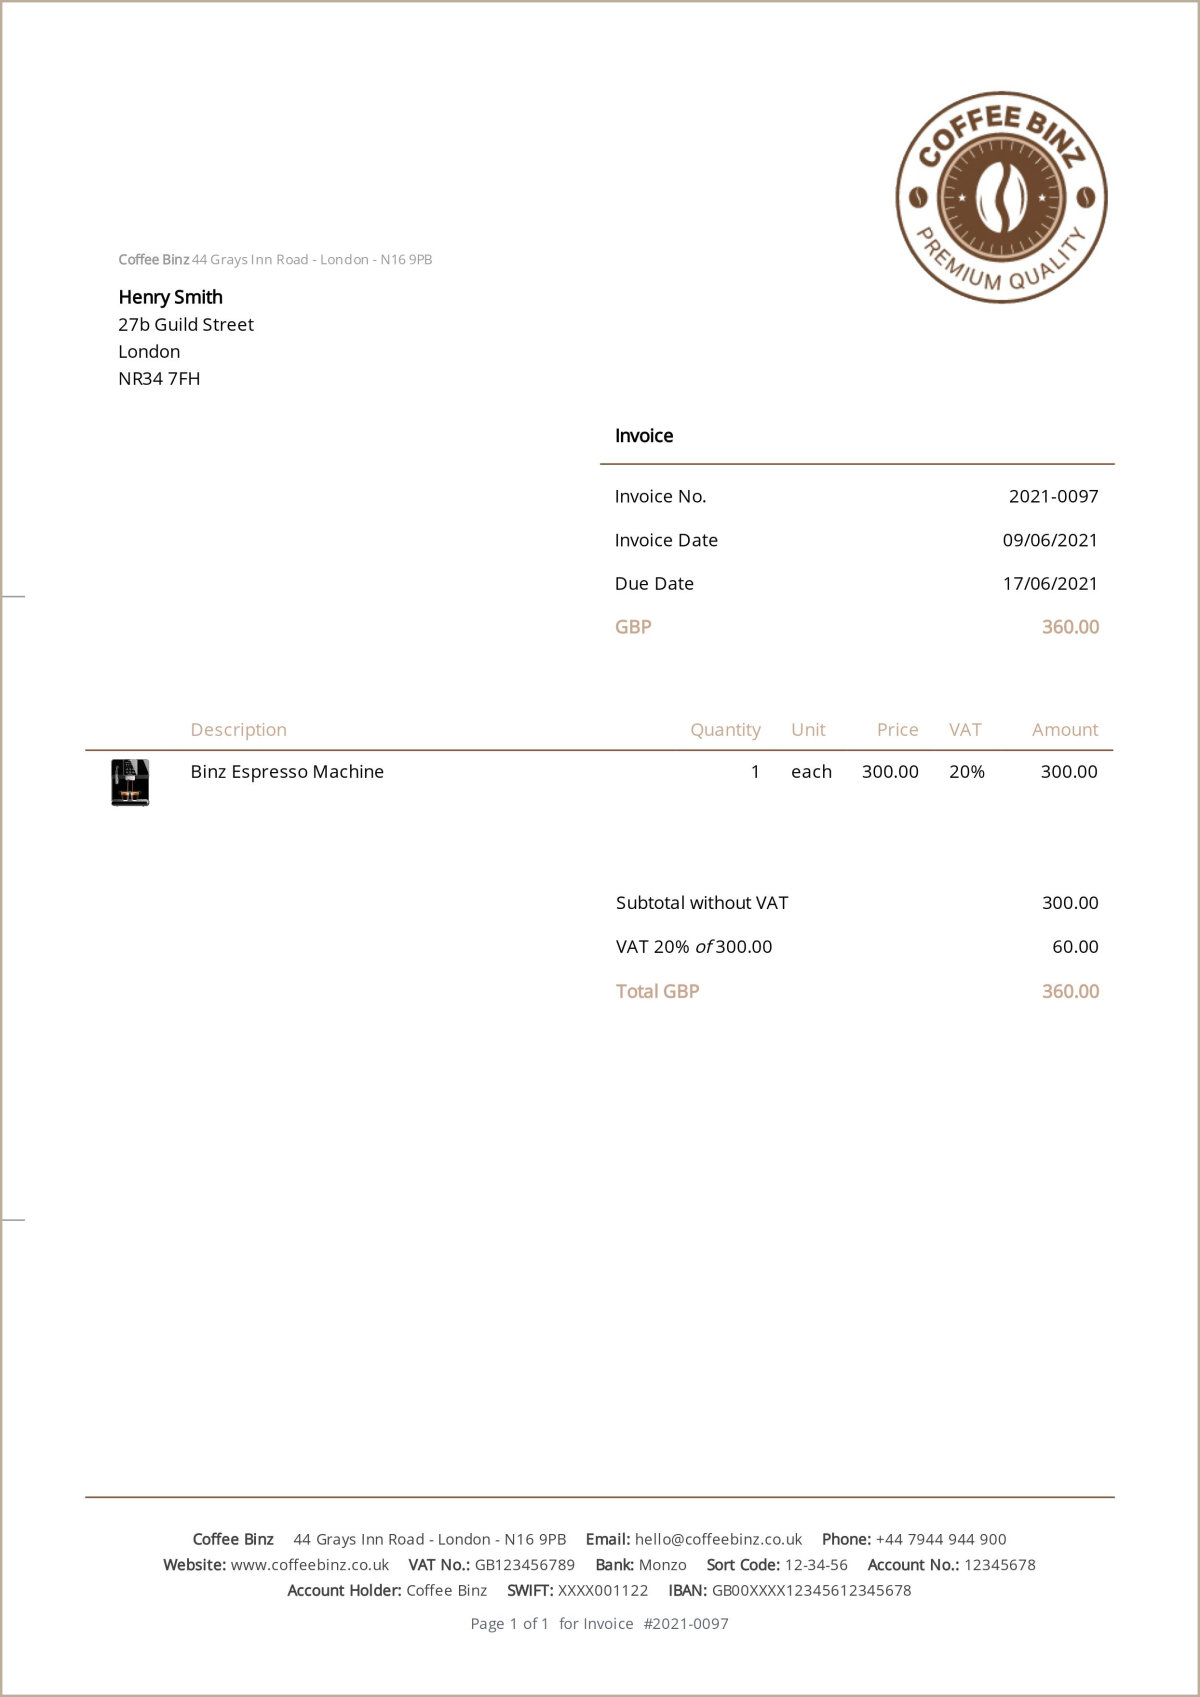 Sample invoice with prices shown in net pricing format.